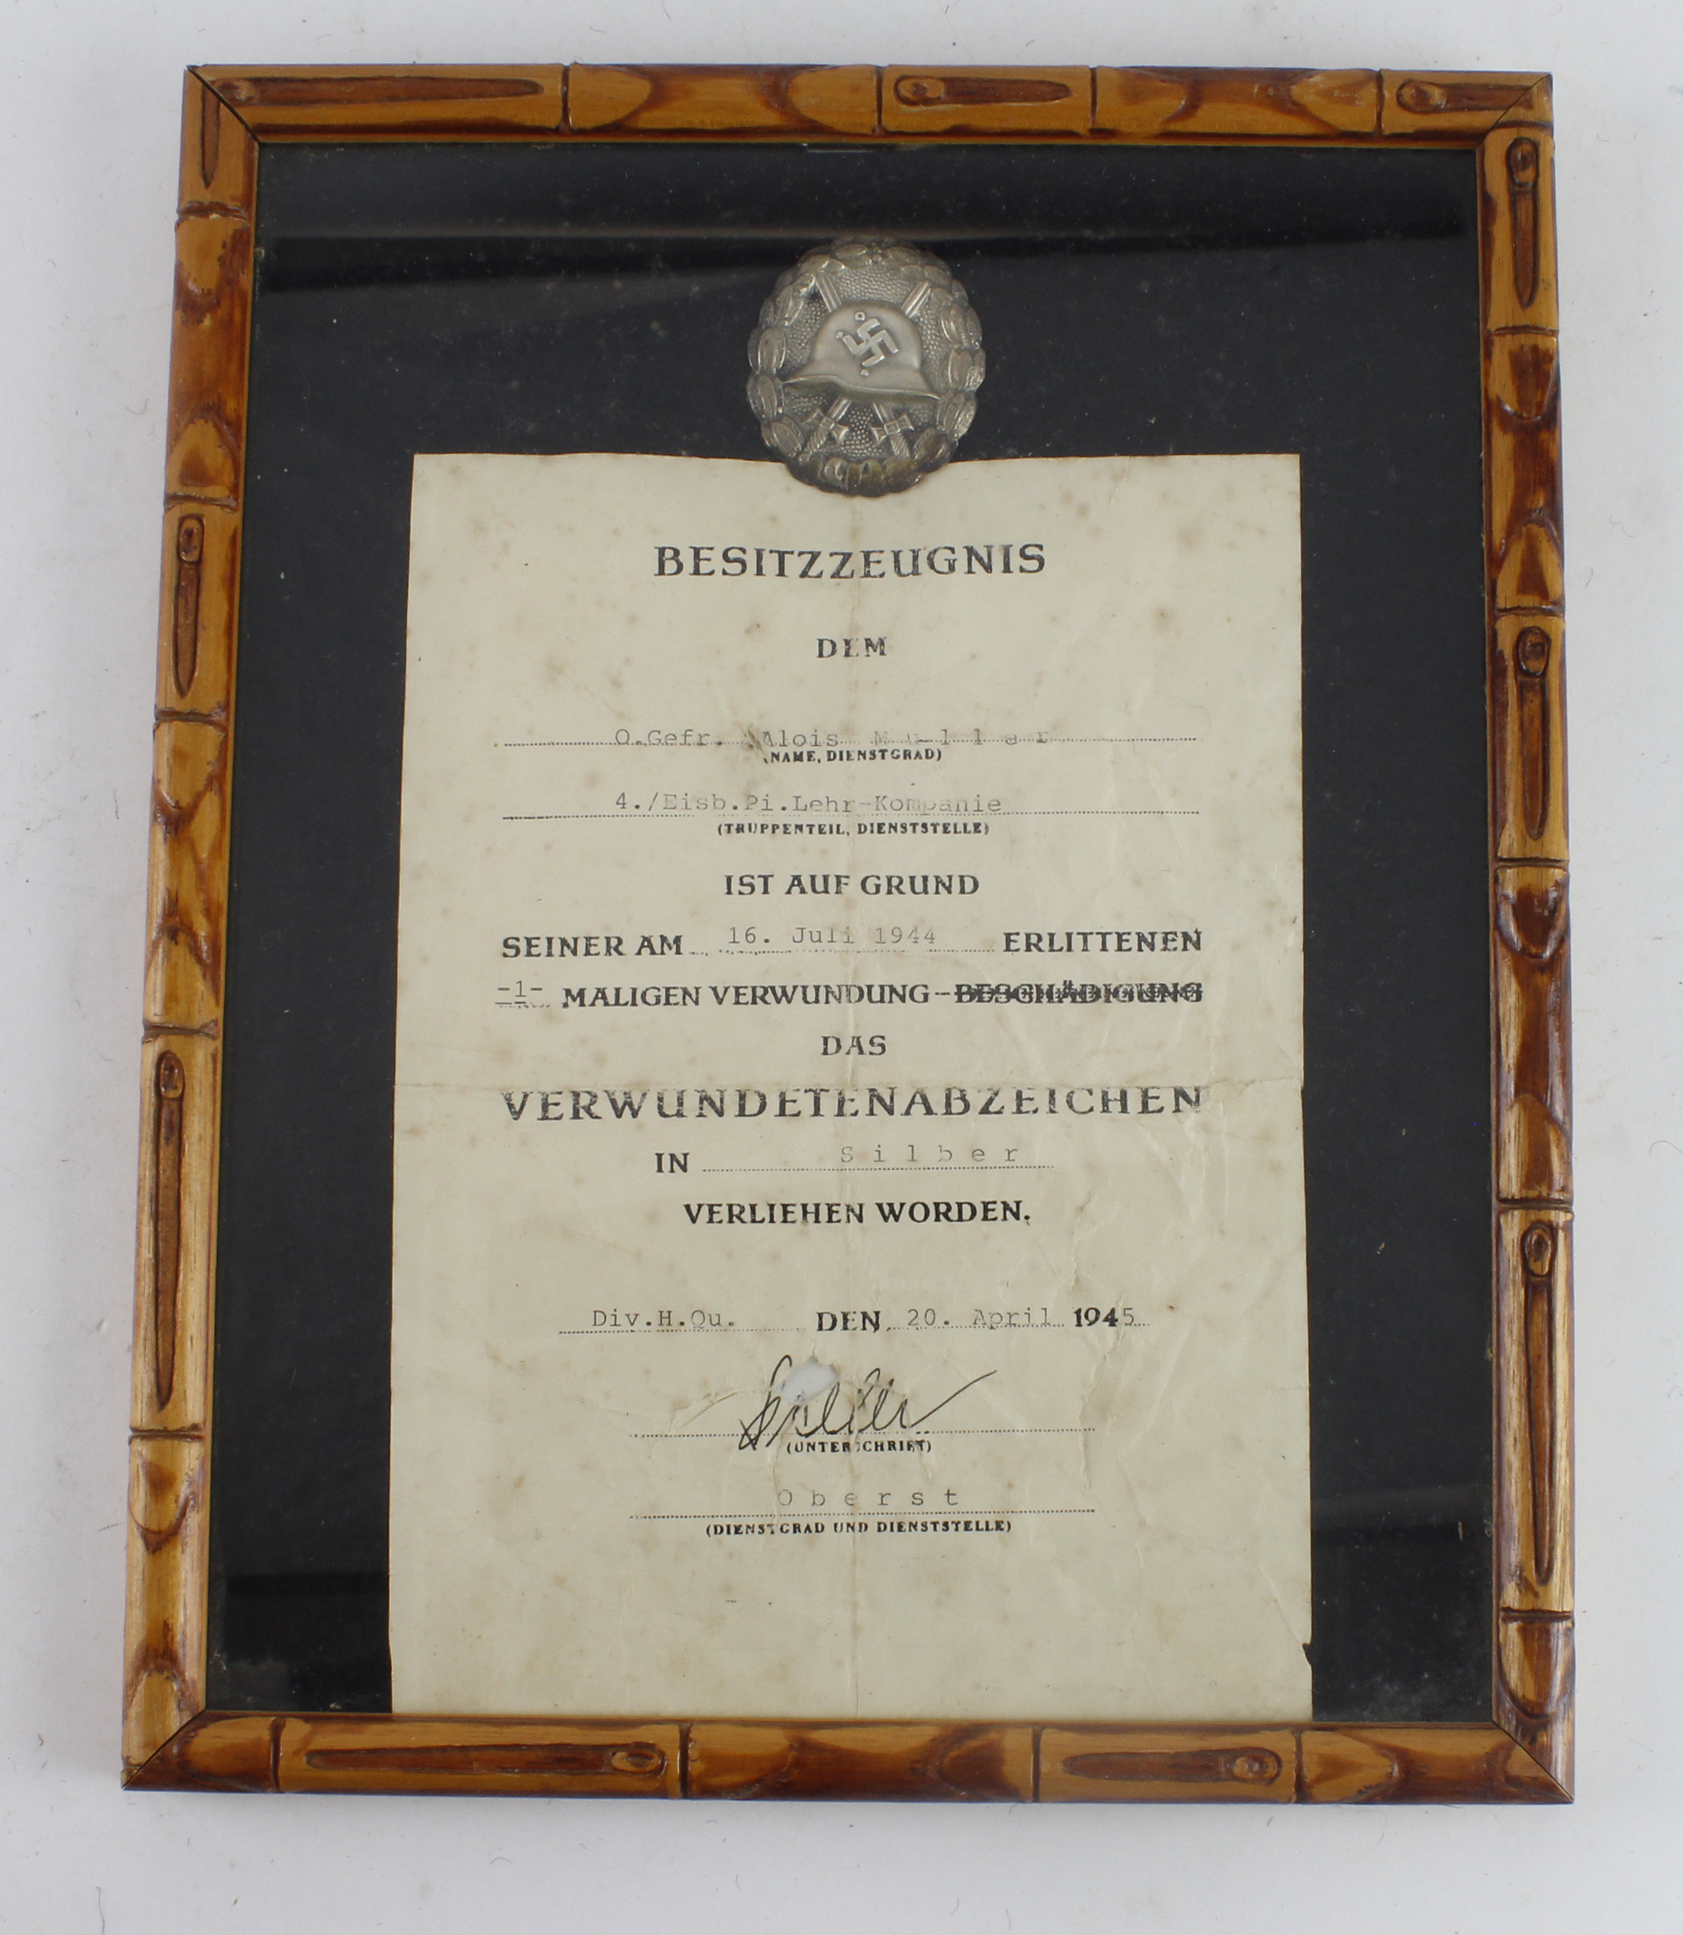 German 3rd Reich Silver Wounds Badge with original award certificate dated 16 July 1944 for 4./